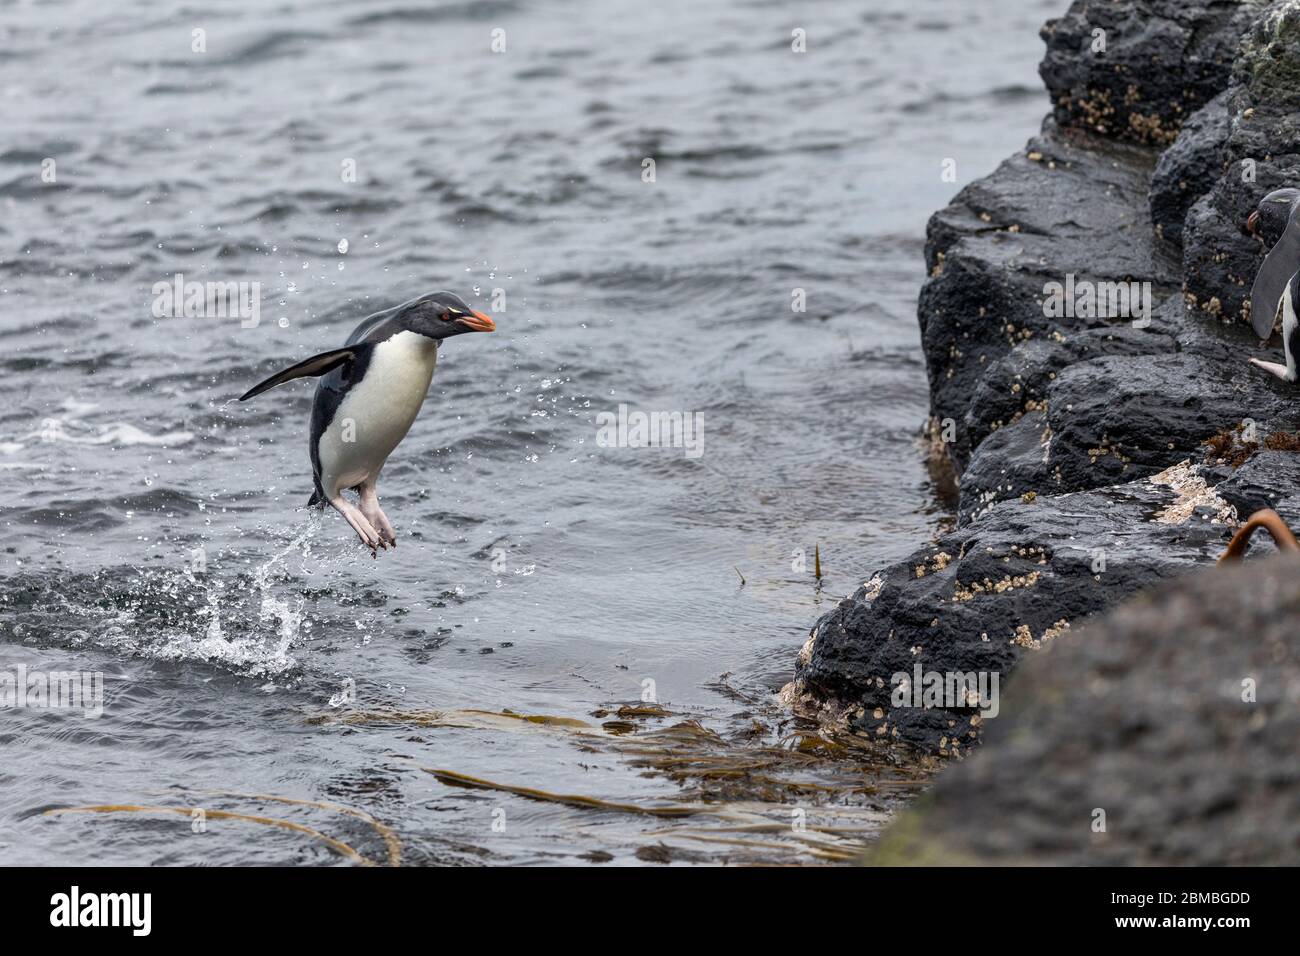 Southern Rockhopper Penguin; Eudyptes chrysocome; Jumping out of the Sea; Falklands Stock Photo